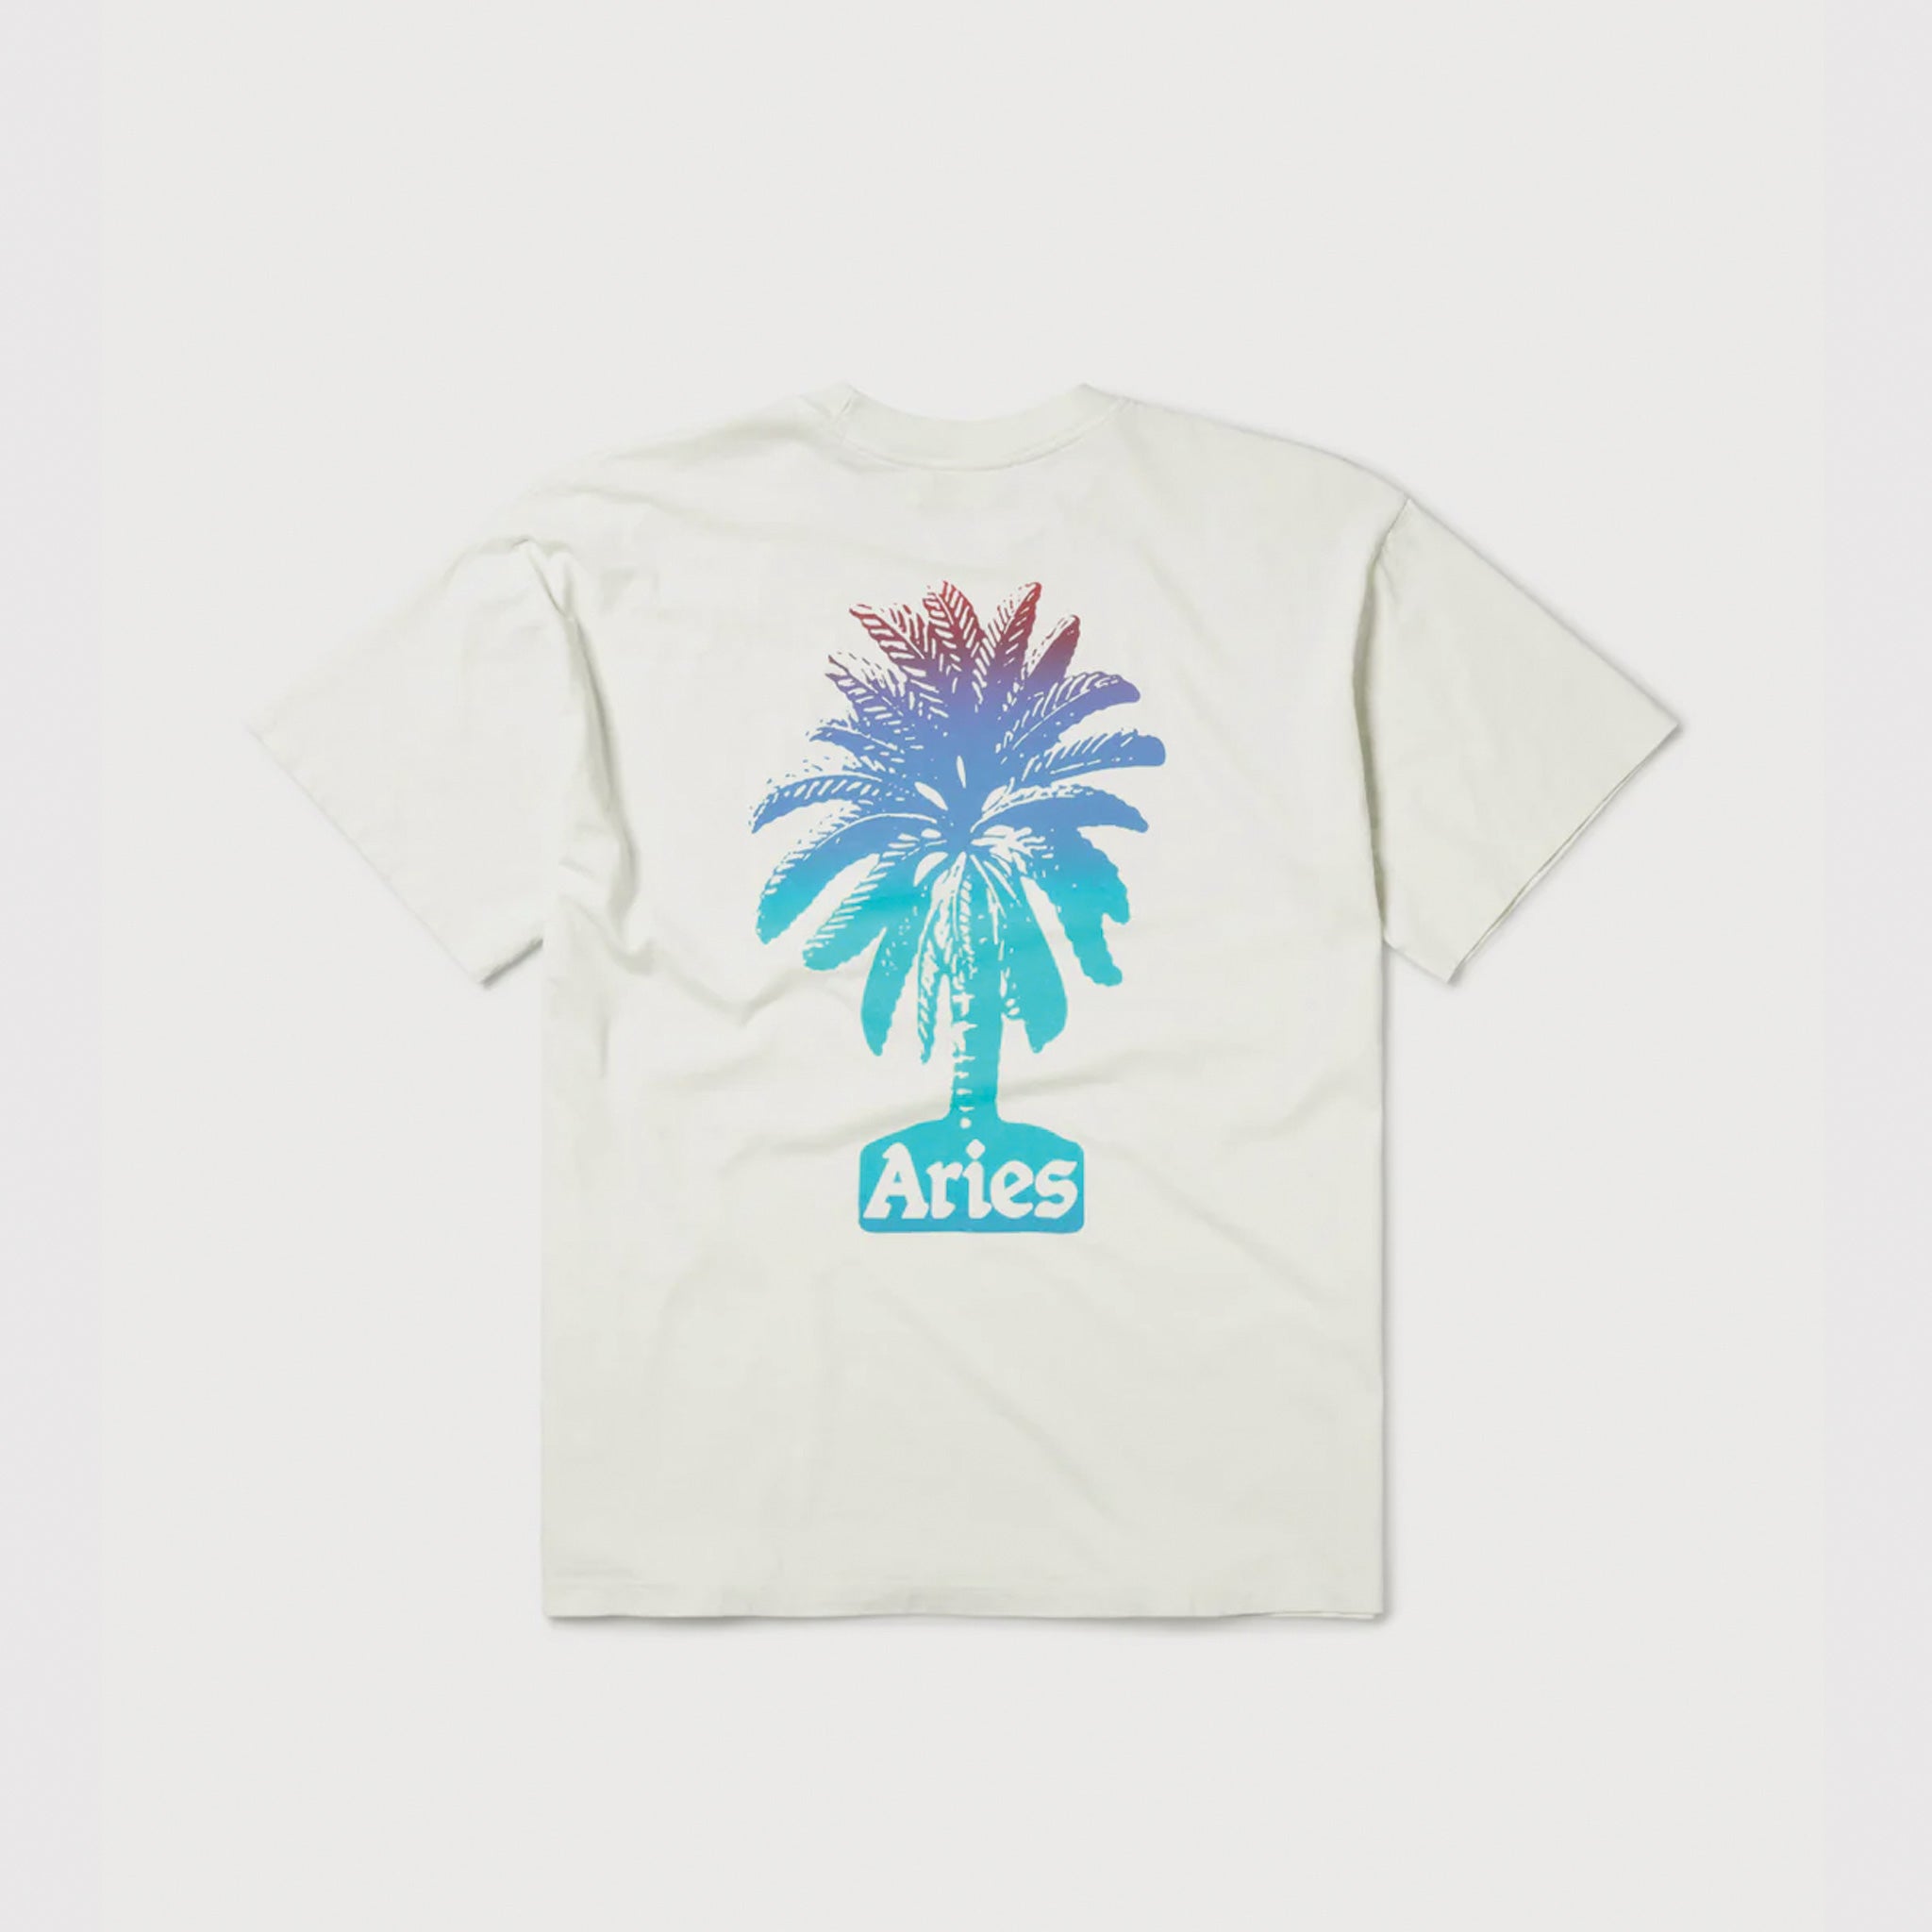 Back flat photo of the Aries Palm short sleeve tee with a large back graphic of a palm tree with the Aries logo.